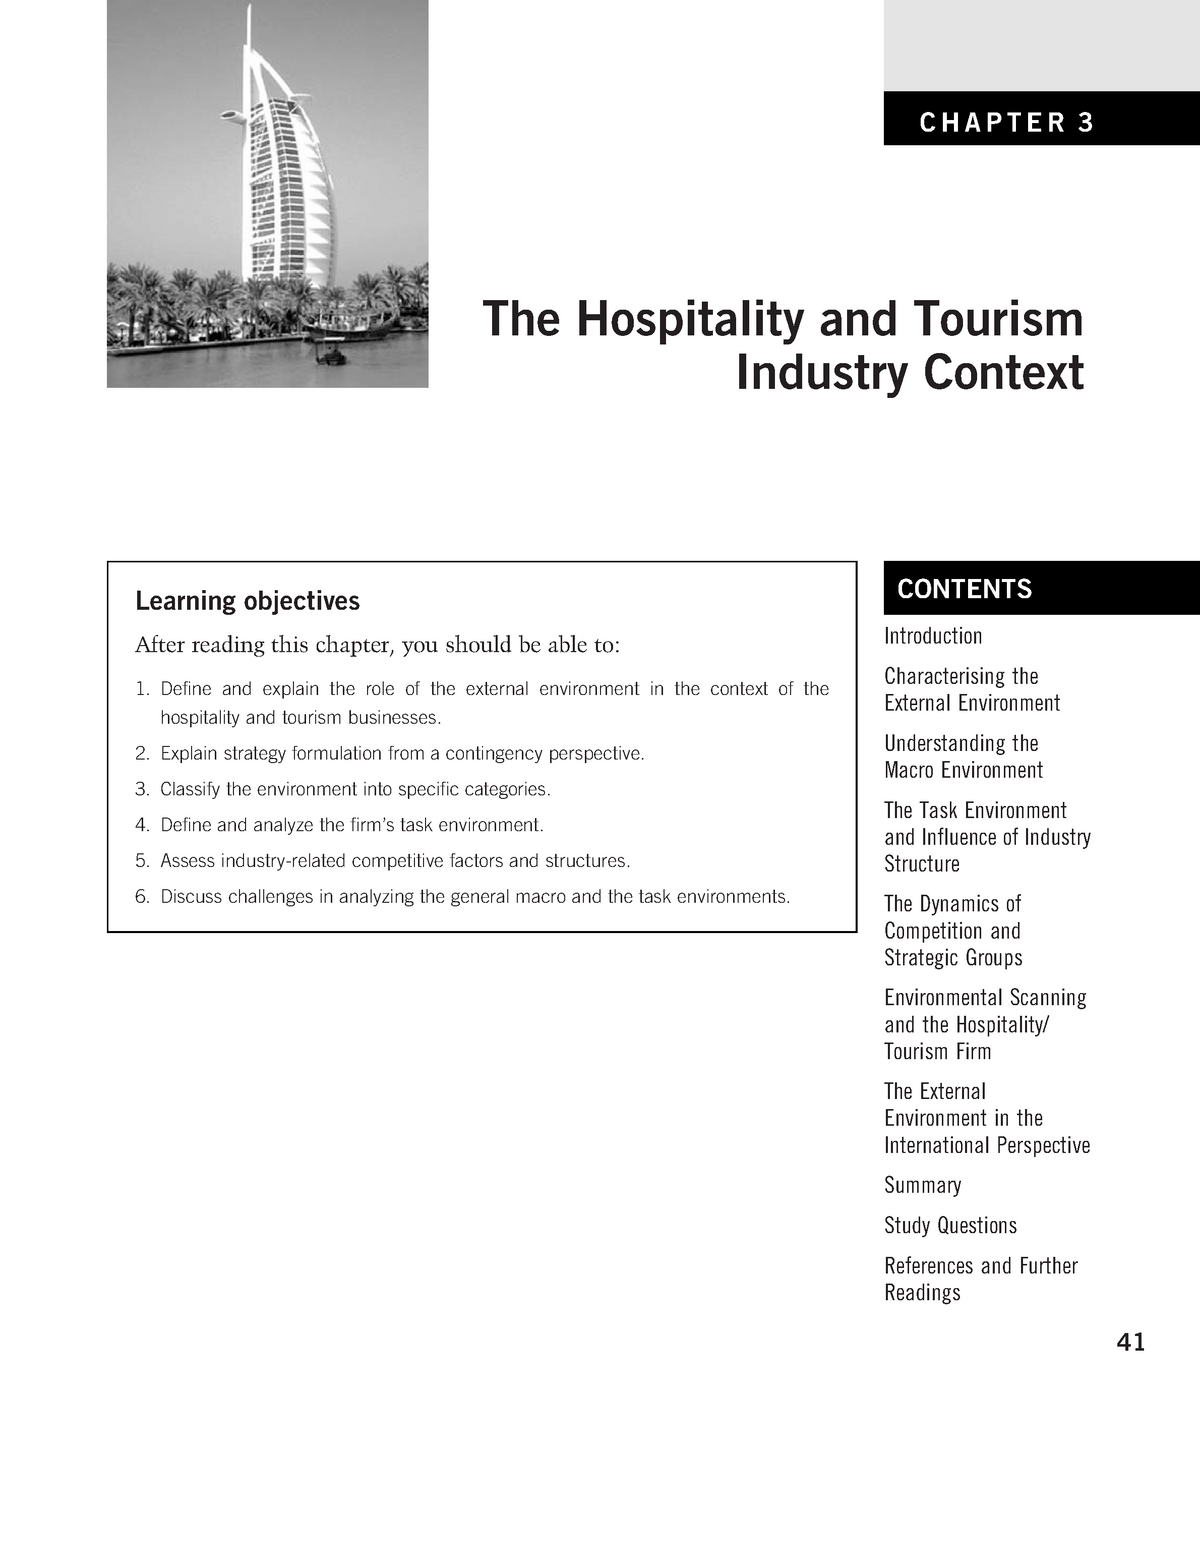 planning research in hospitality and tourism pdf